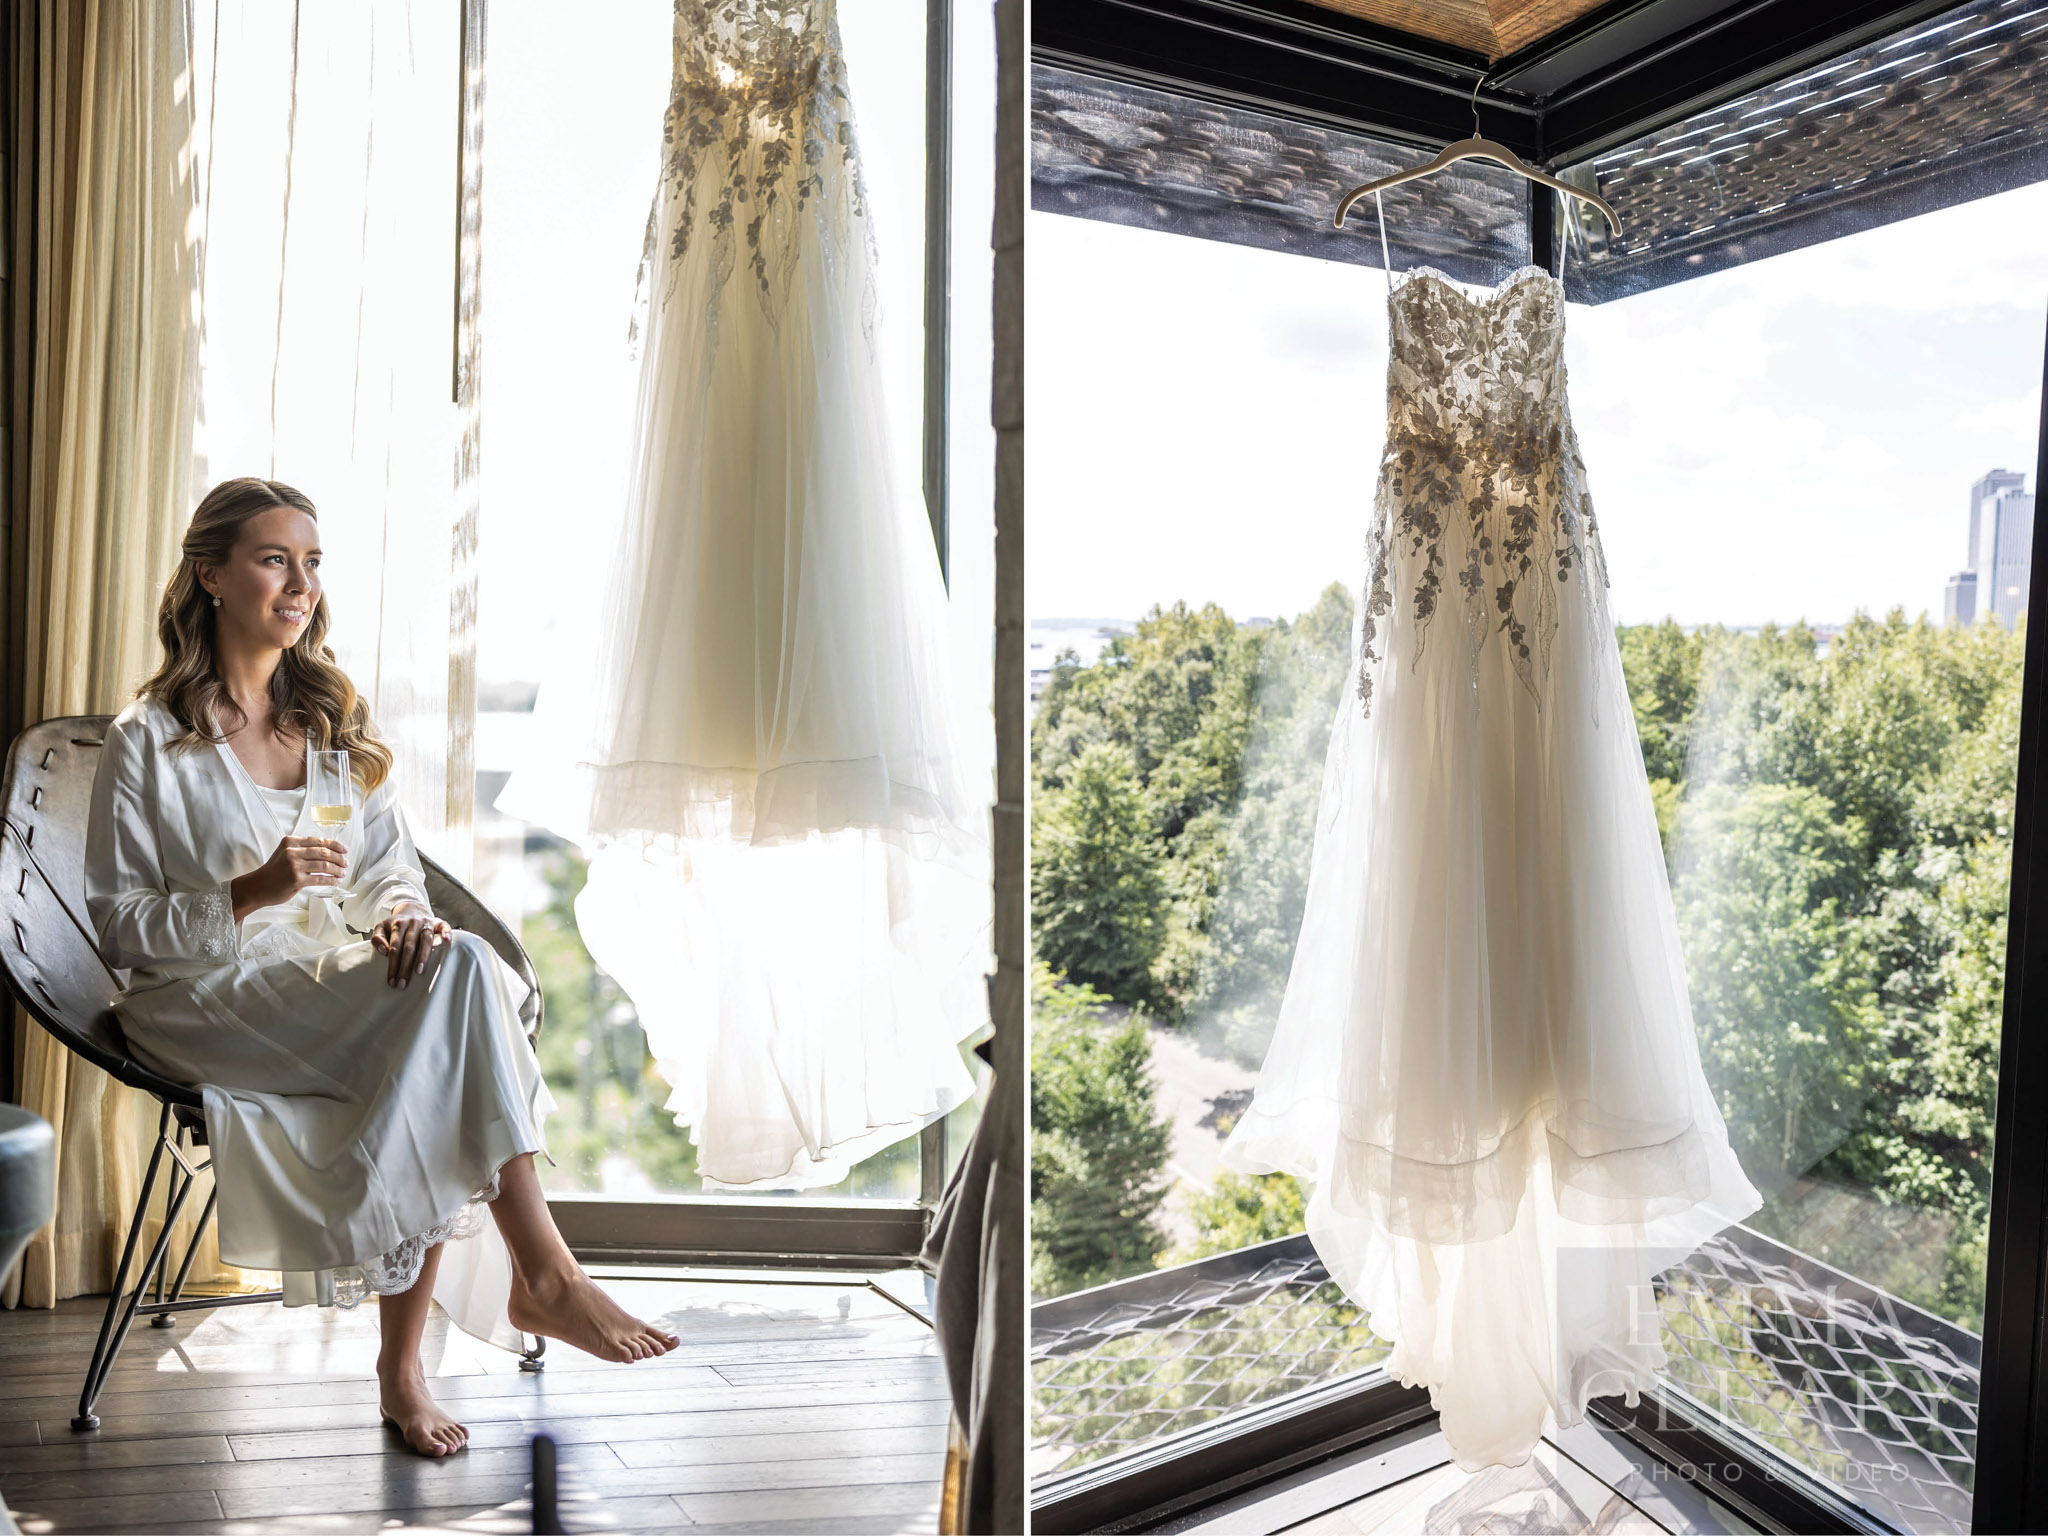 The bride at the window and the wedding dress